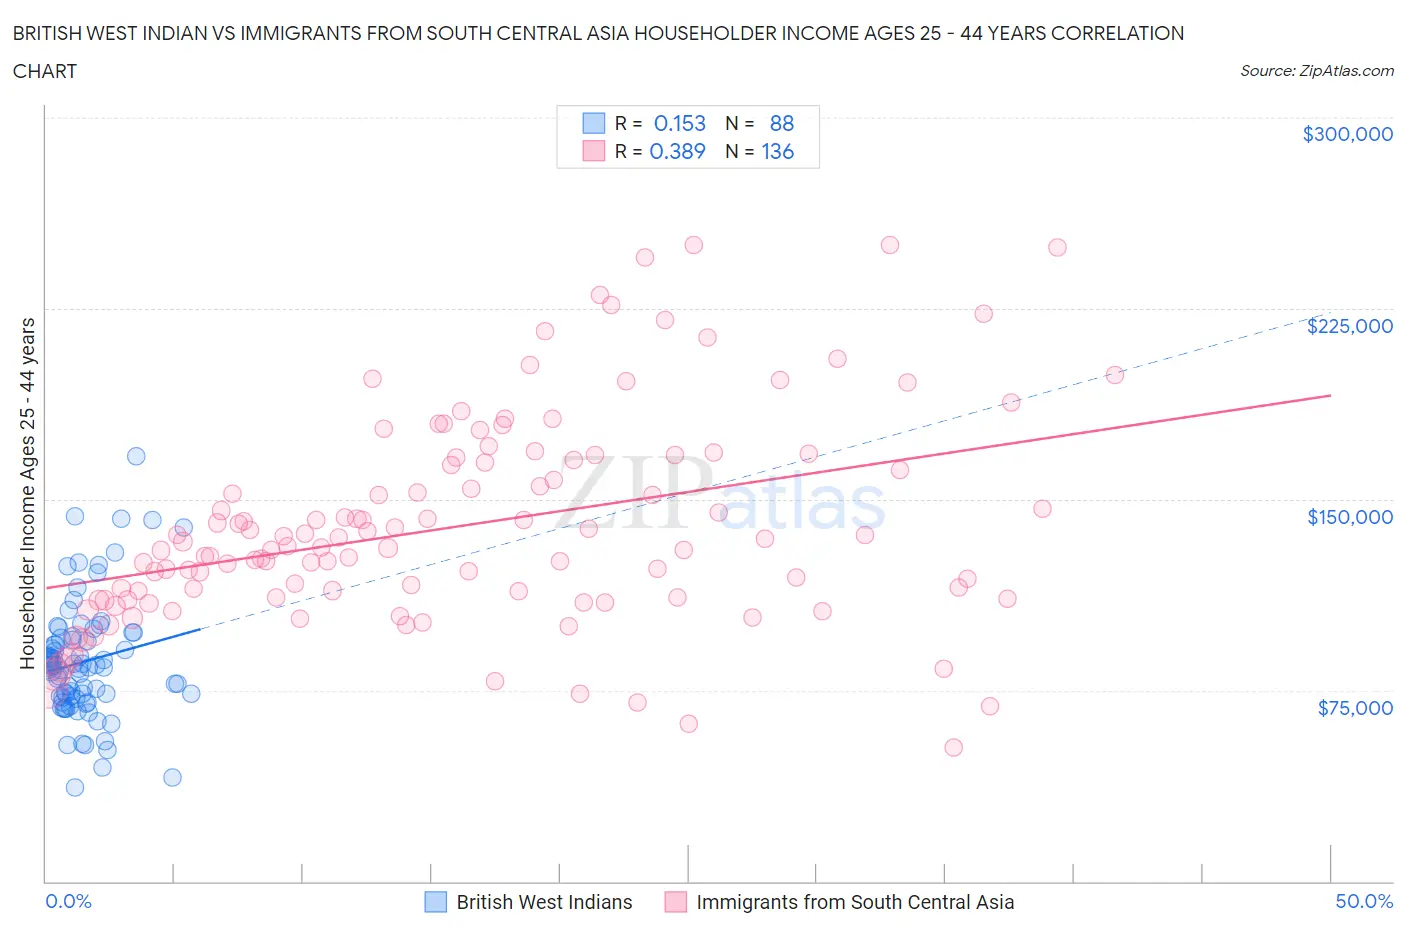 British West Indian vs Immigrants from South Central Asia Householder Income Ages 25 - 44 years